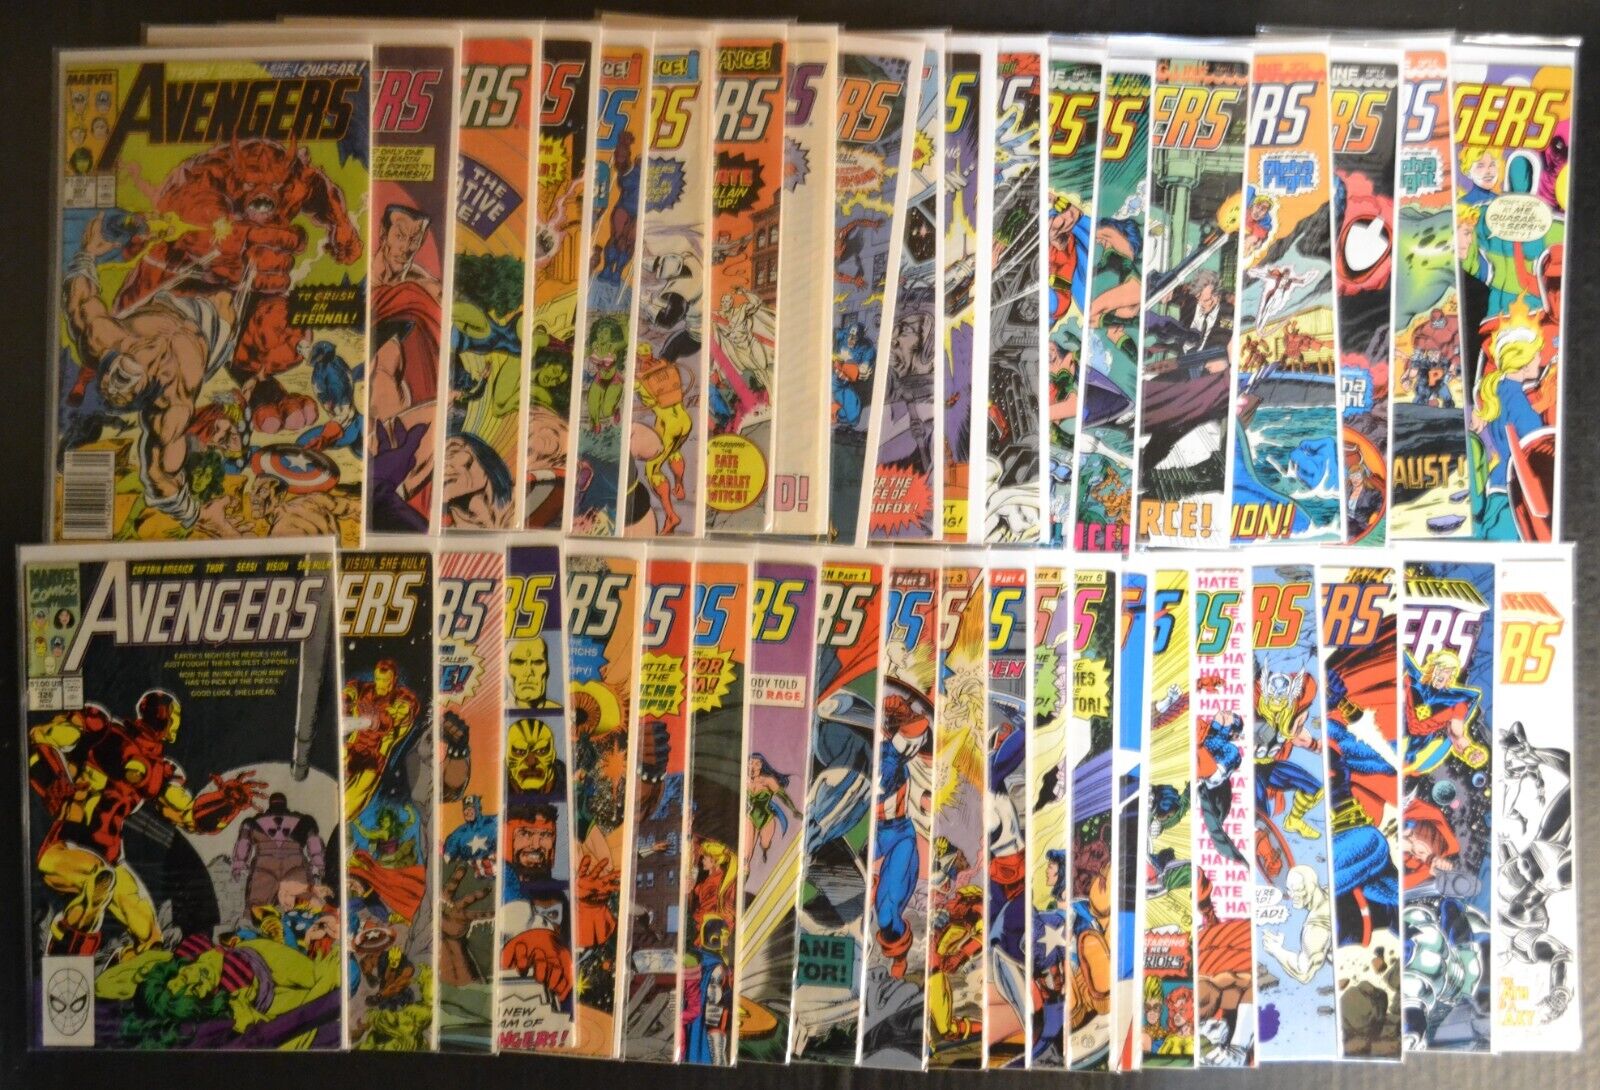 The Avengers #316 (Marvel) Volume 1 Copper Age Comic Book Lot; 40 Amazing Issues